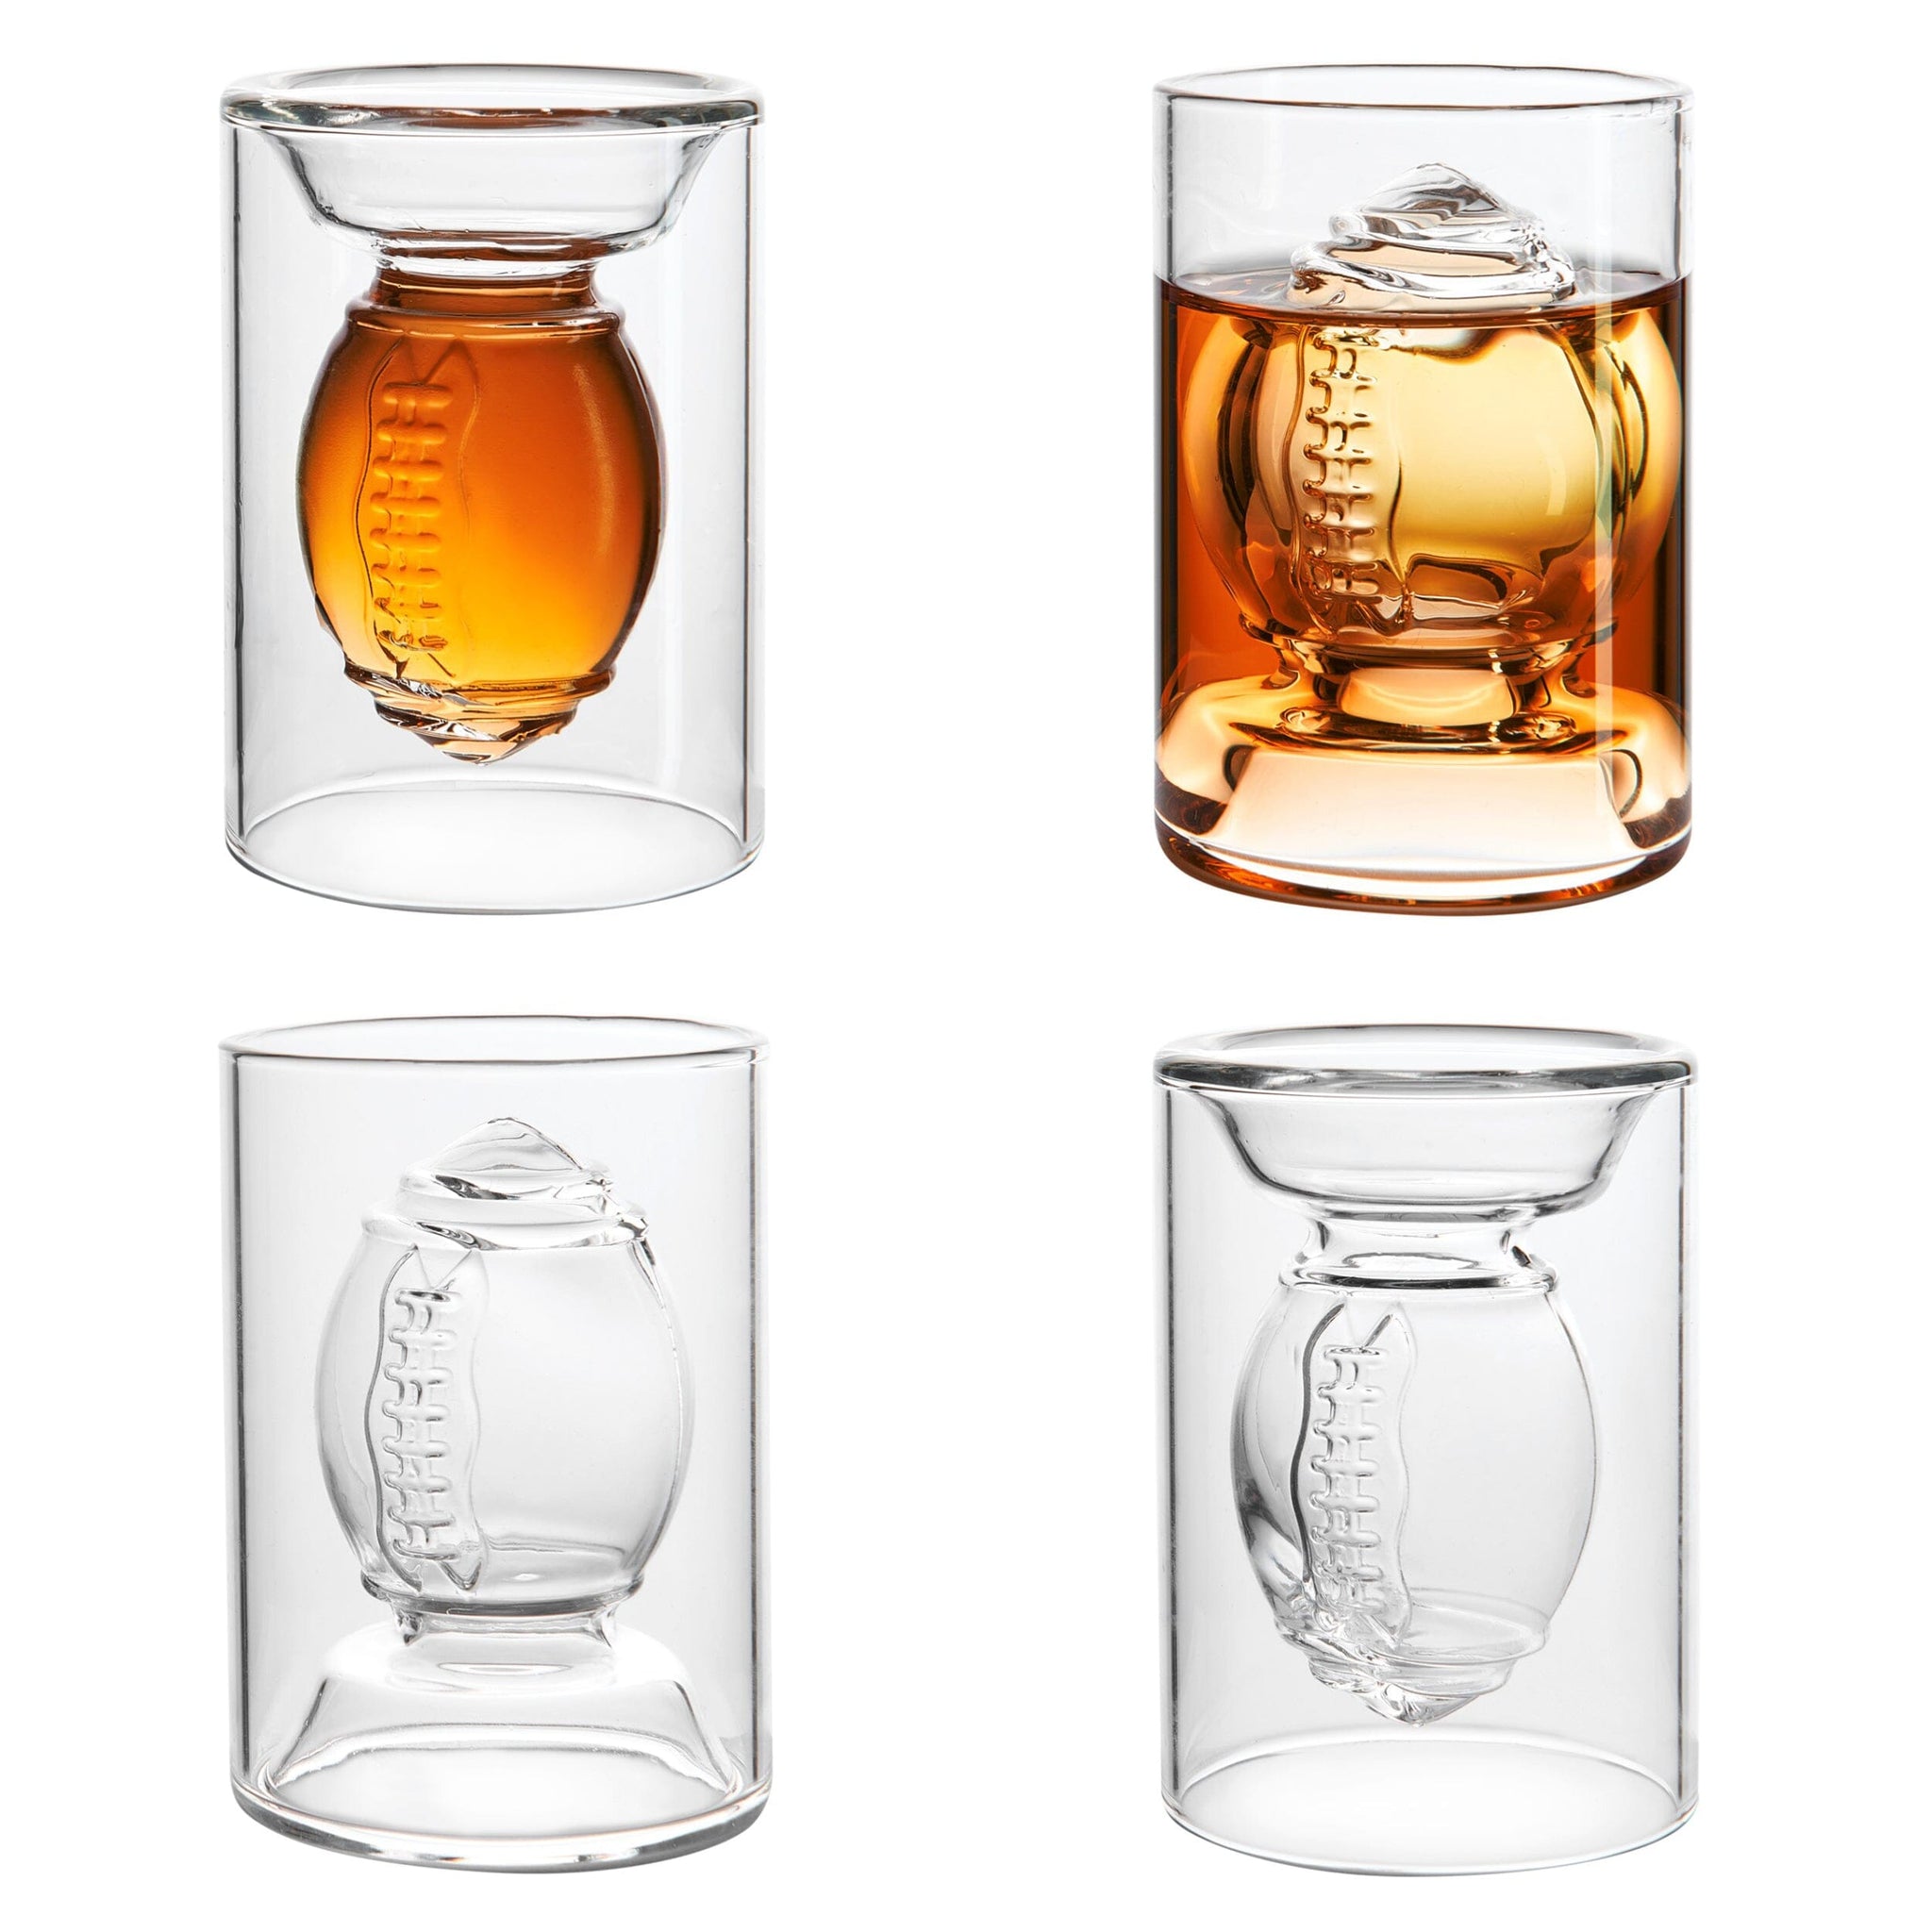 40YARDS American Football Shot Glasses (4 pieces)